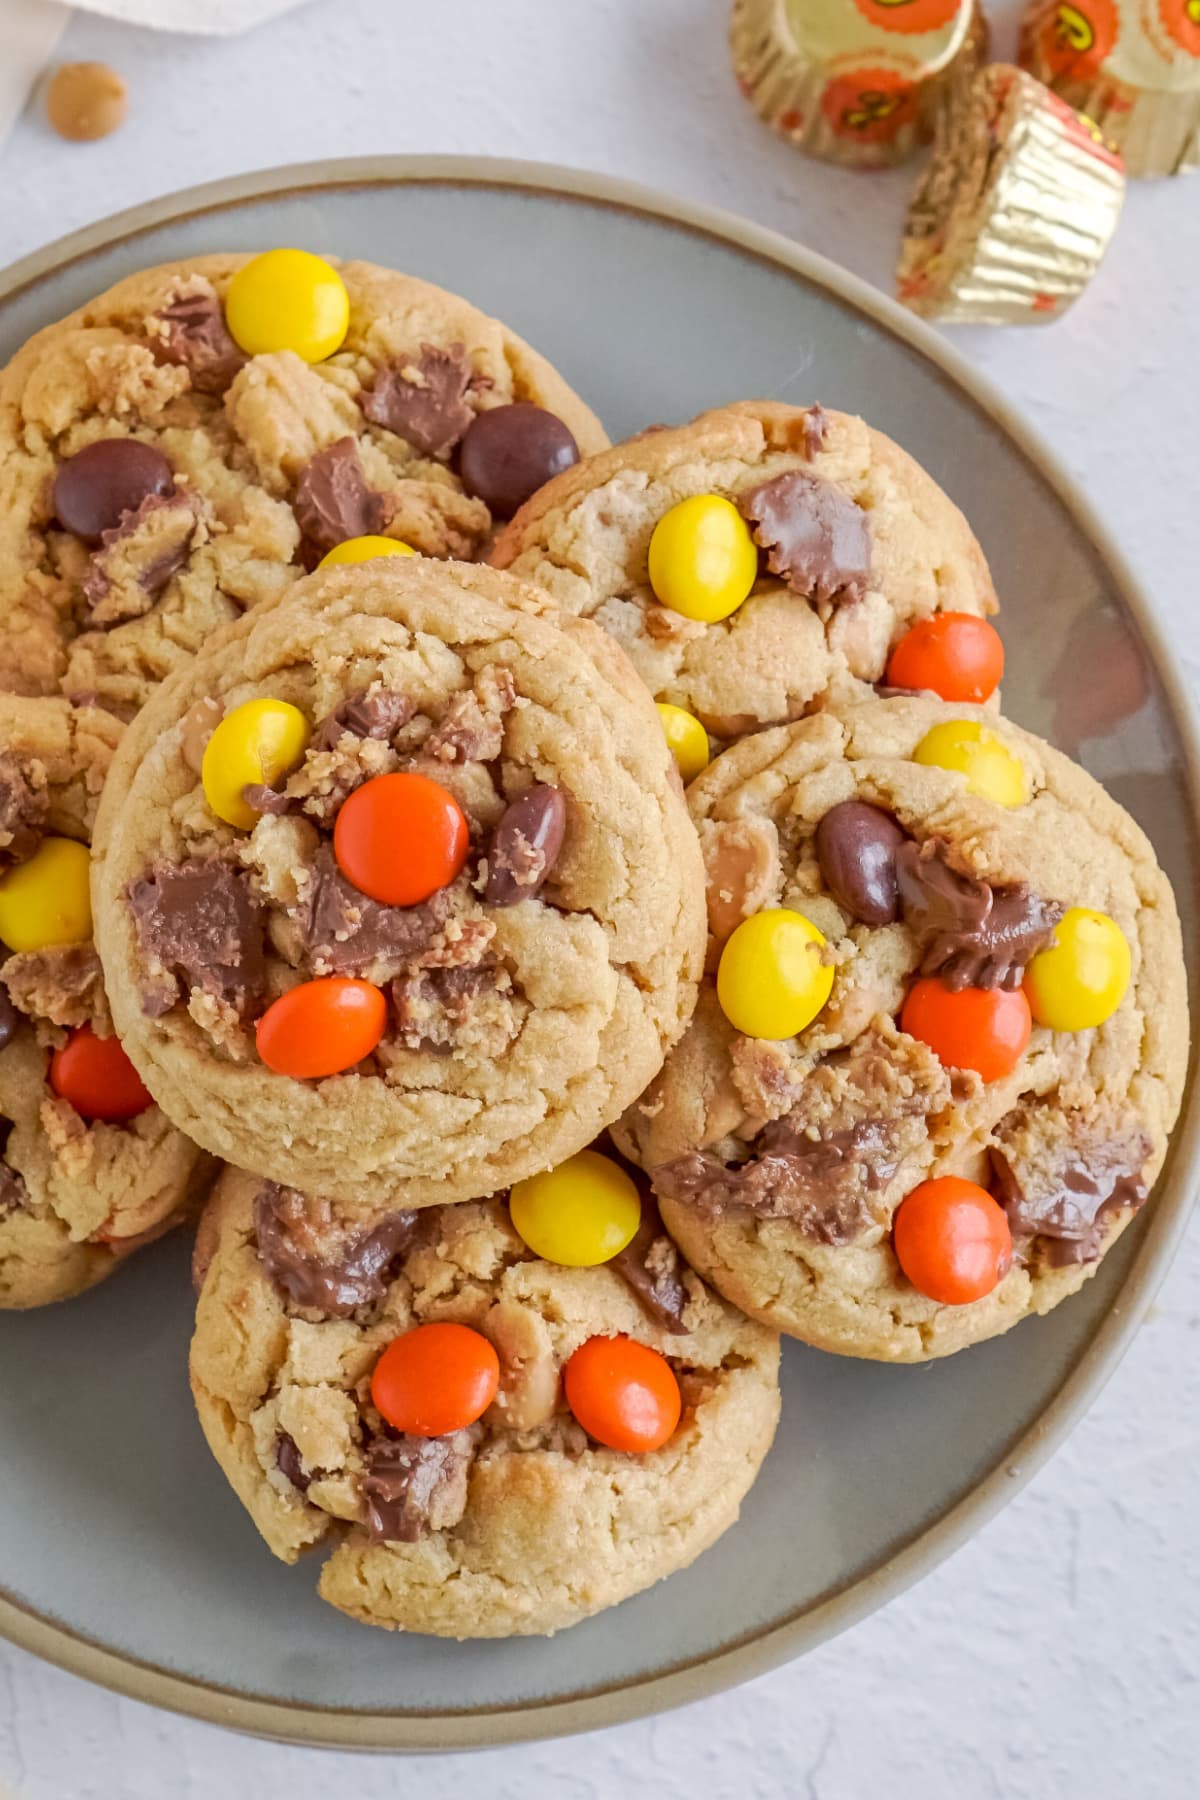 Reese's Peanut Butter Cookies on a plate